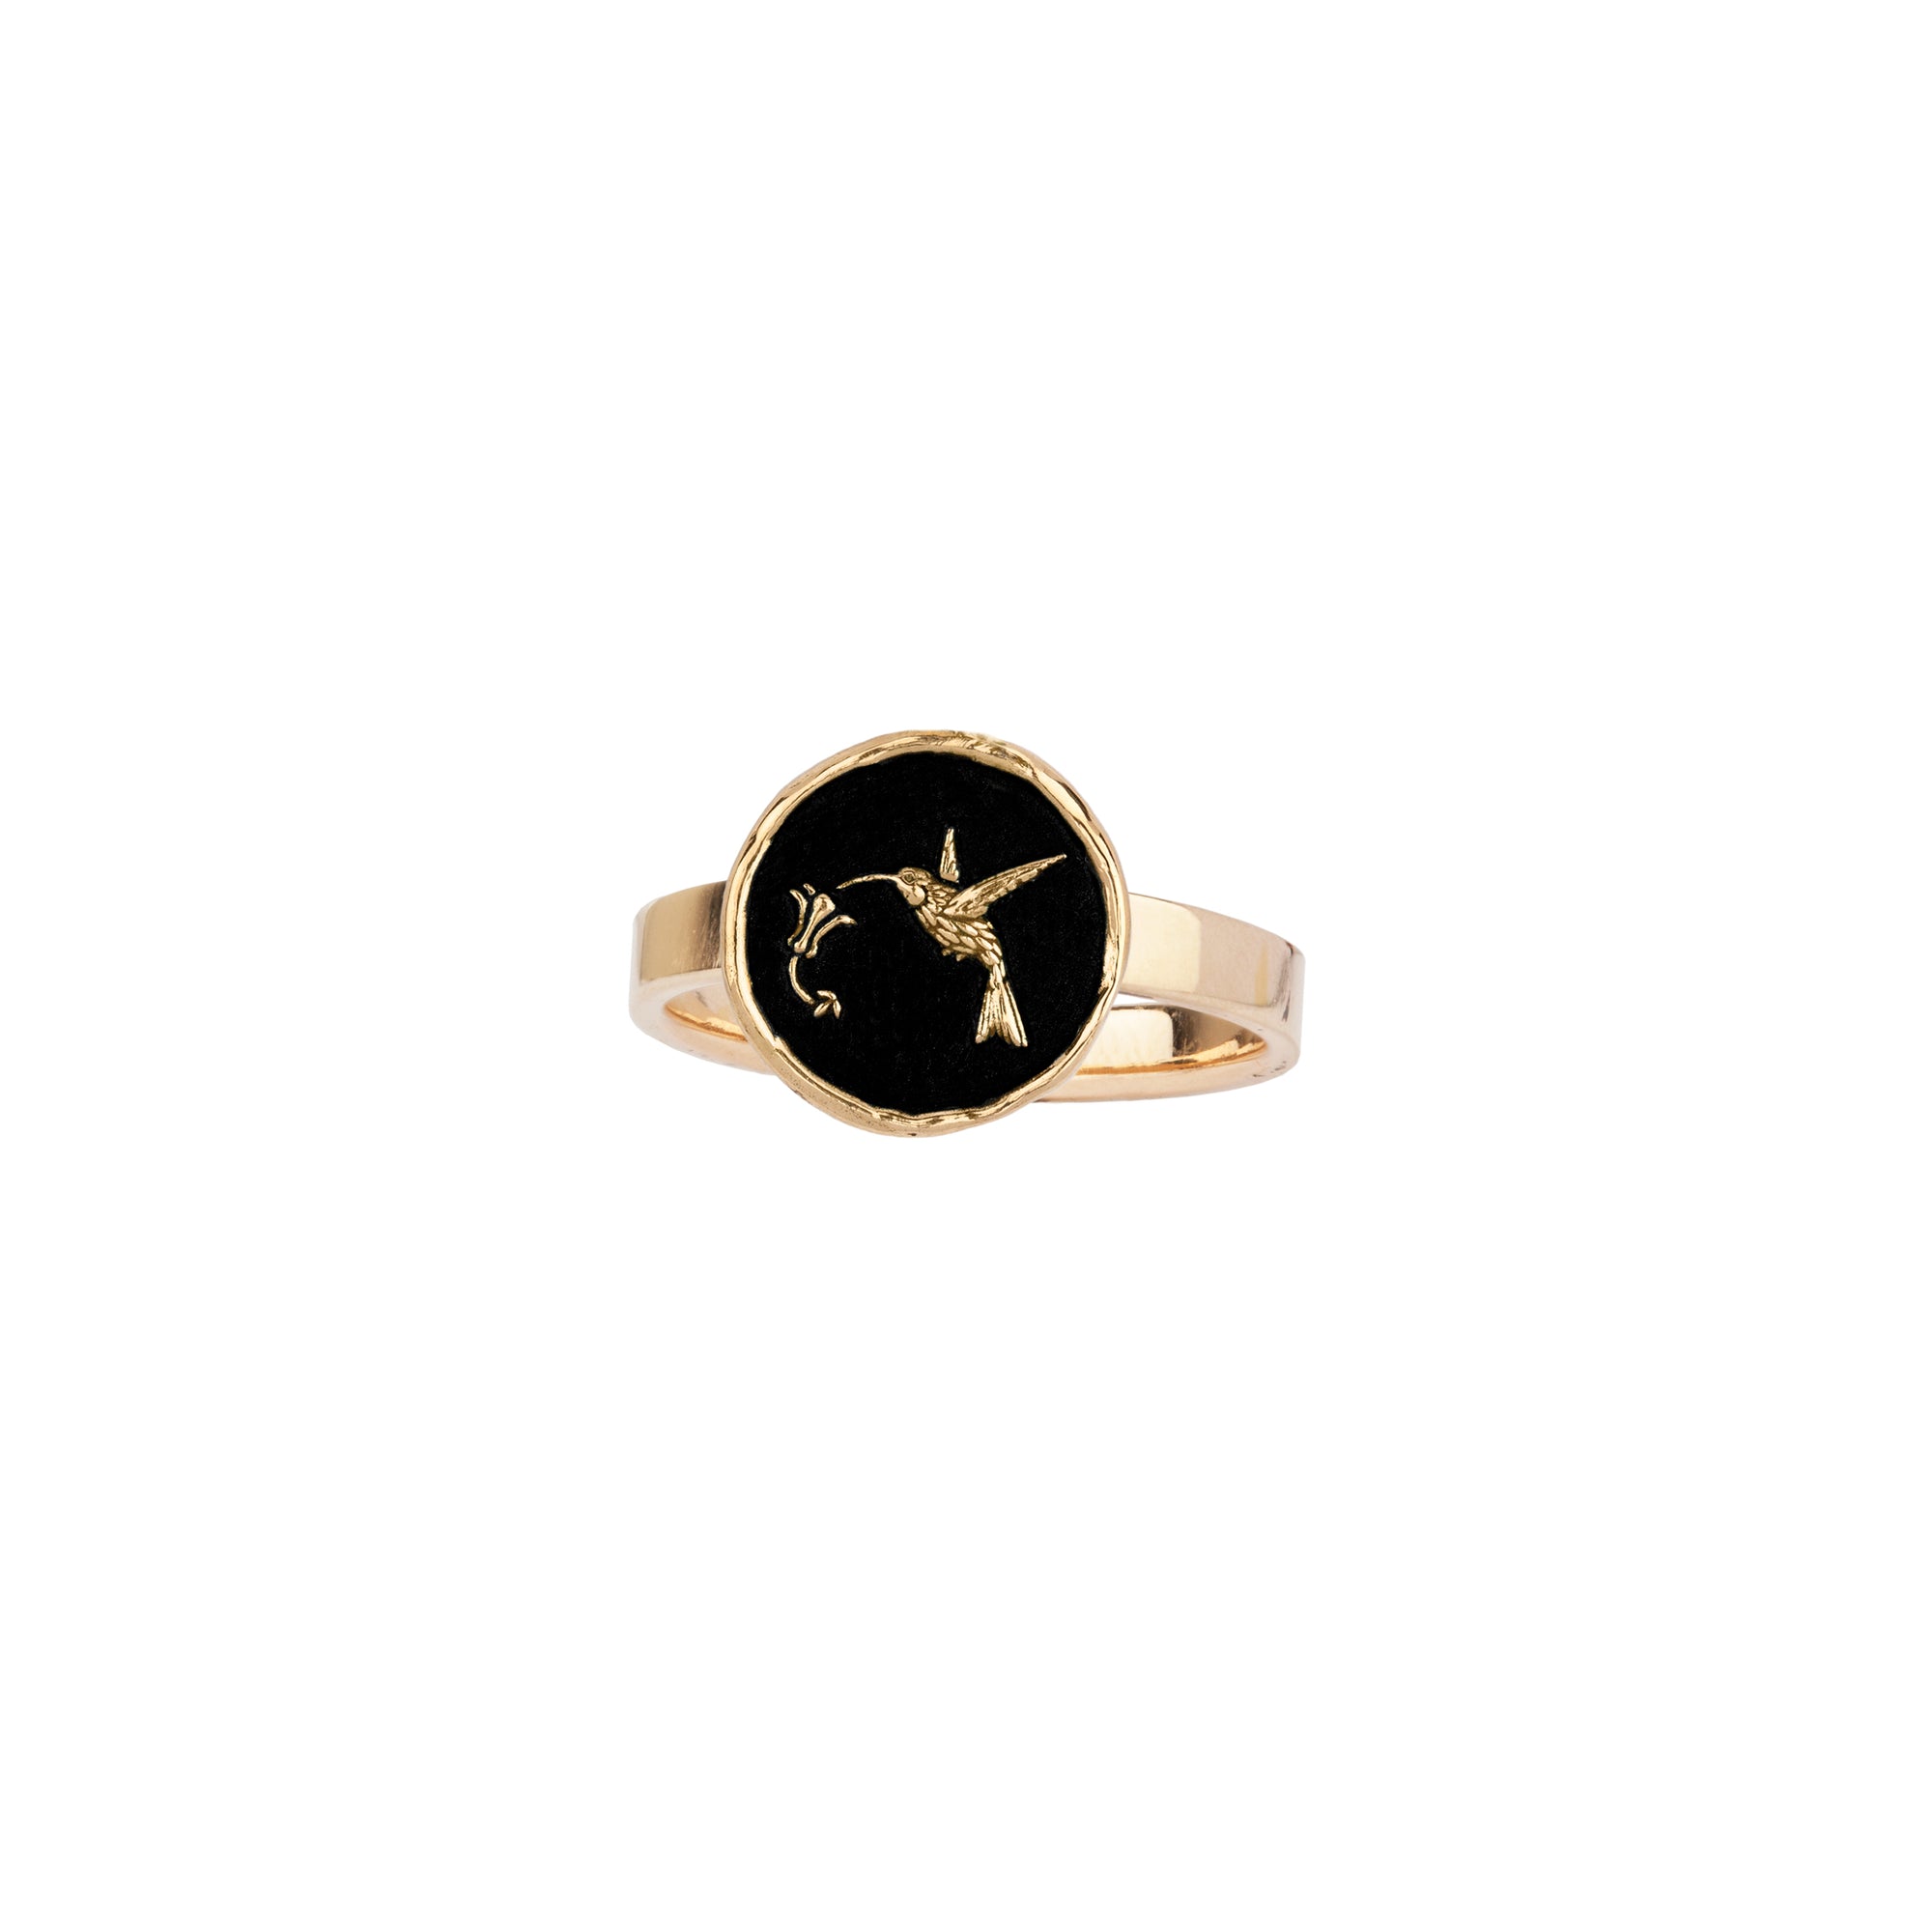 A 14k gold ring with our Hummingbird talisman on the band.